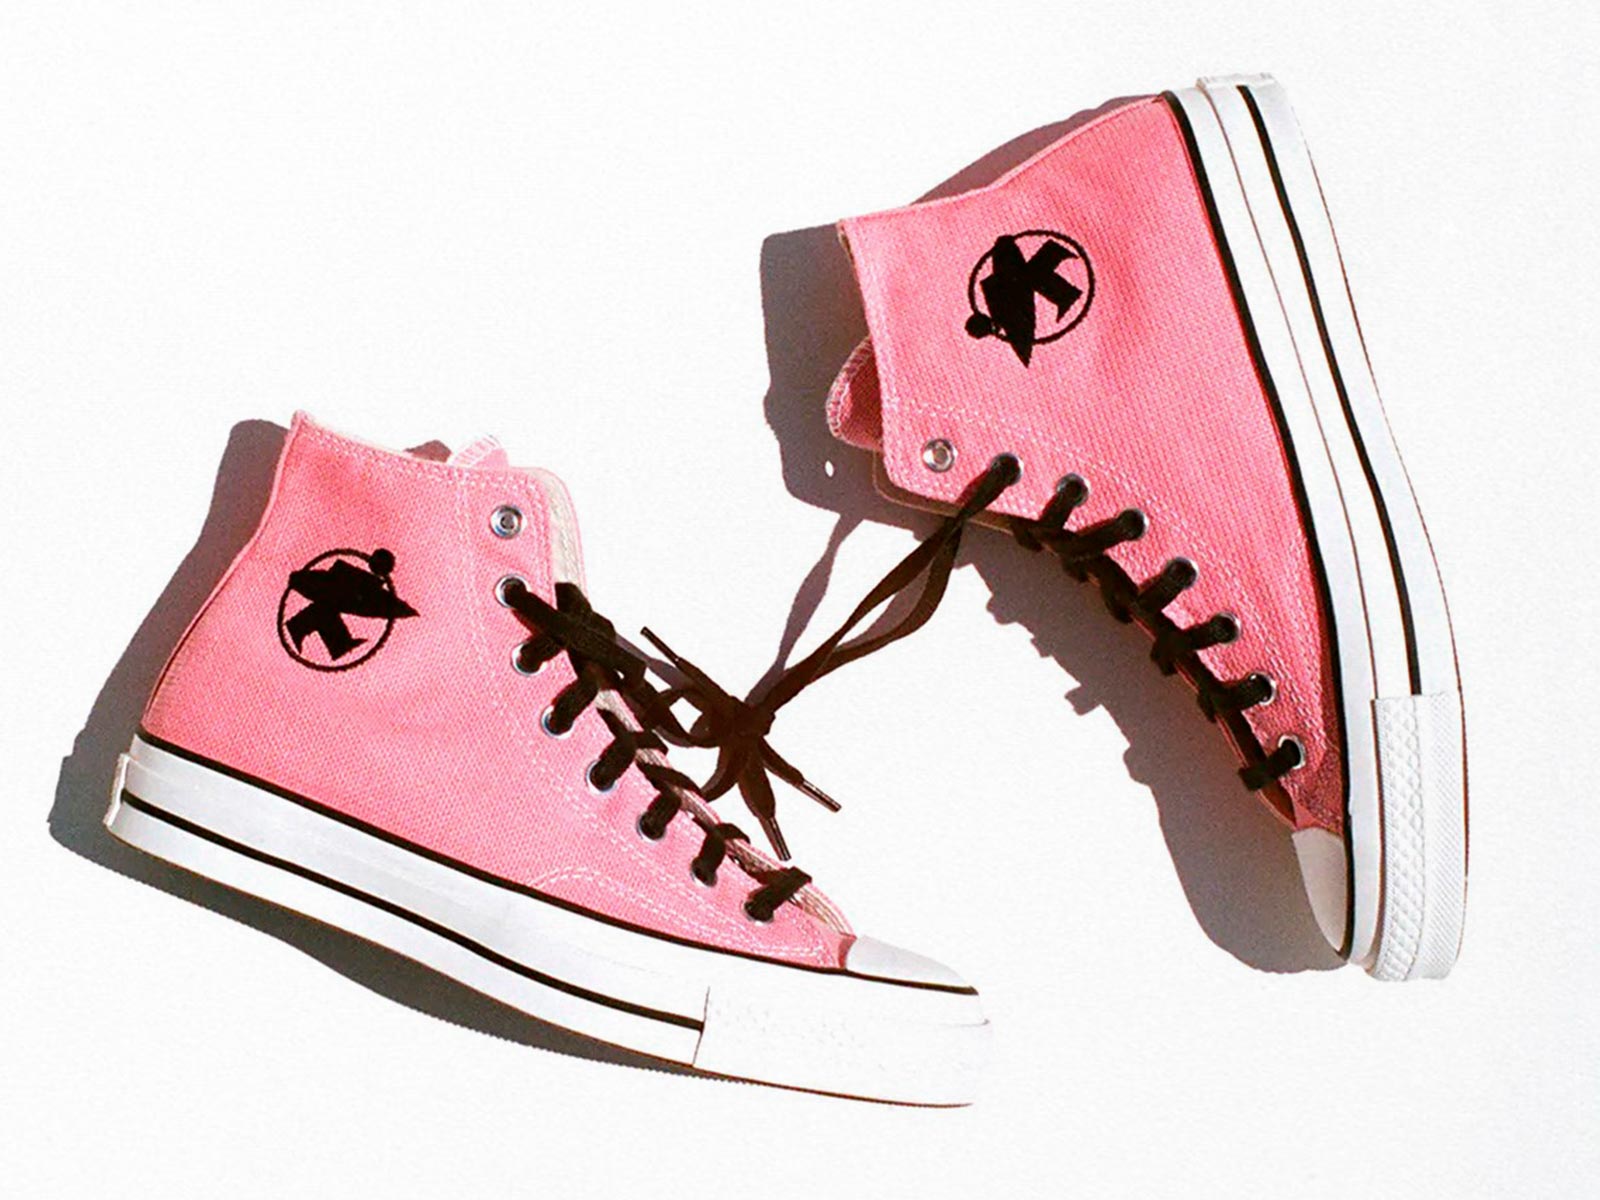 The Stüssy x Converse Chuck 70 Hi, now in pink